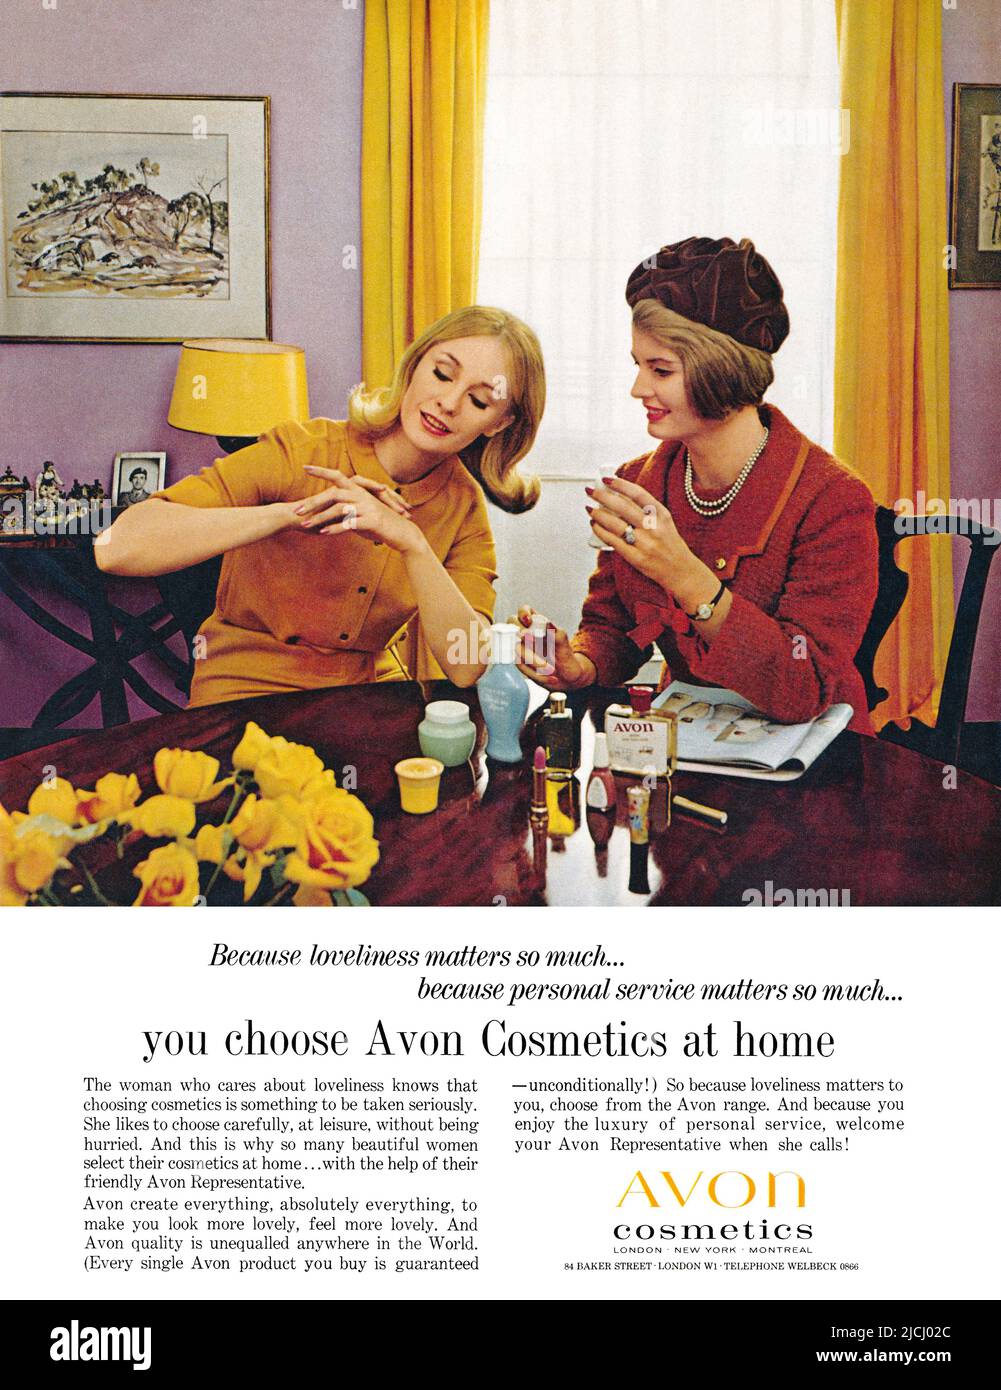 1965 British advertisement for home visits by Avon cosmetics representatives. Stock Photo